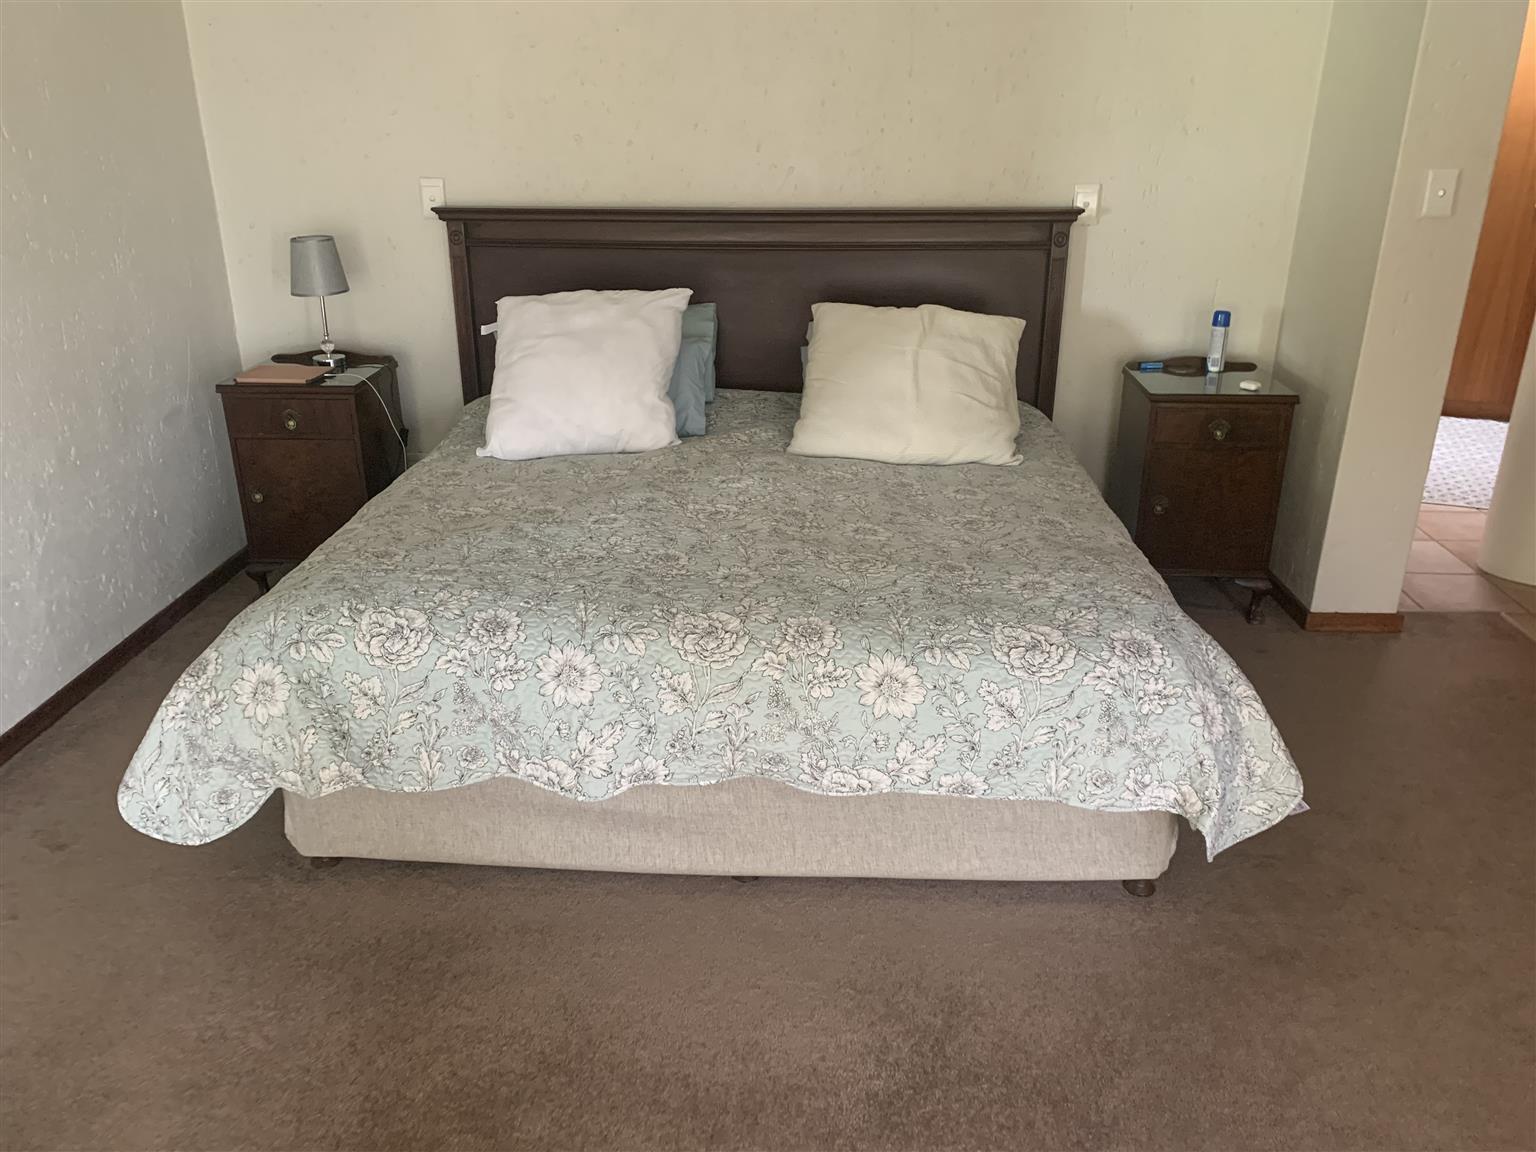 King size bed and base set